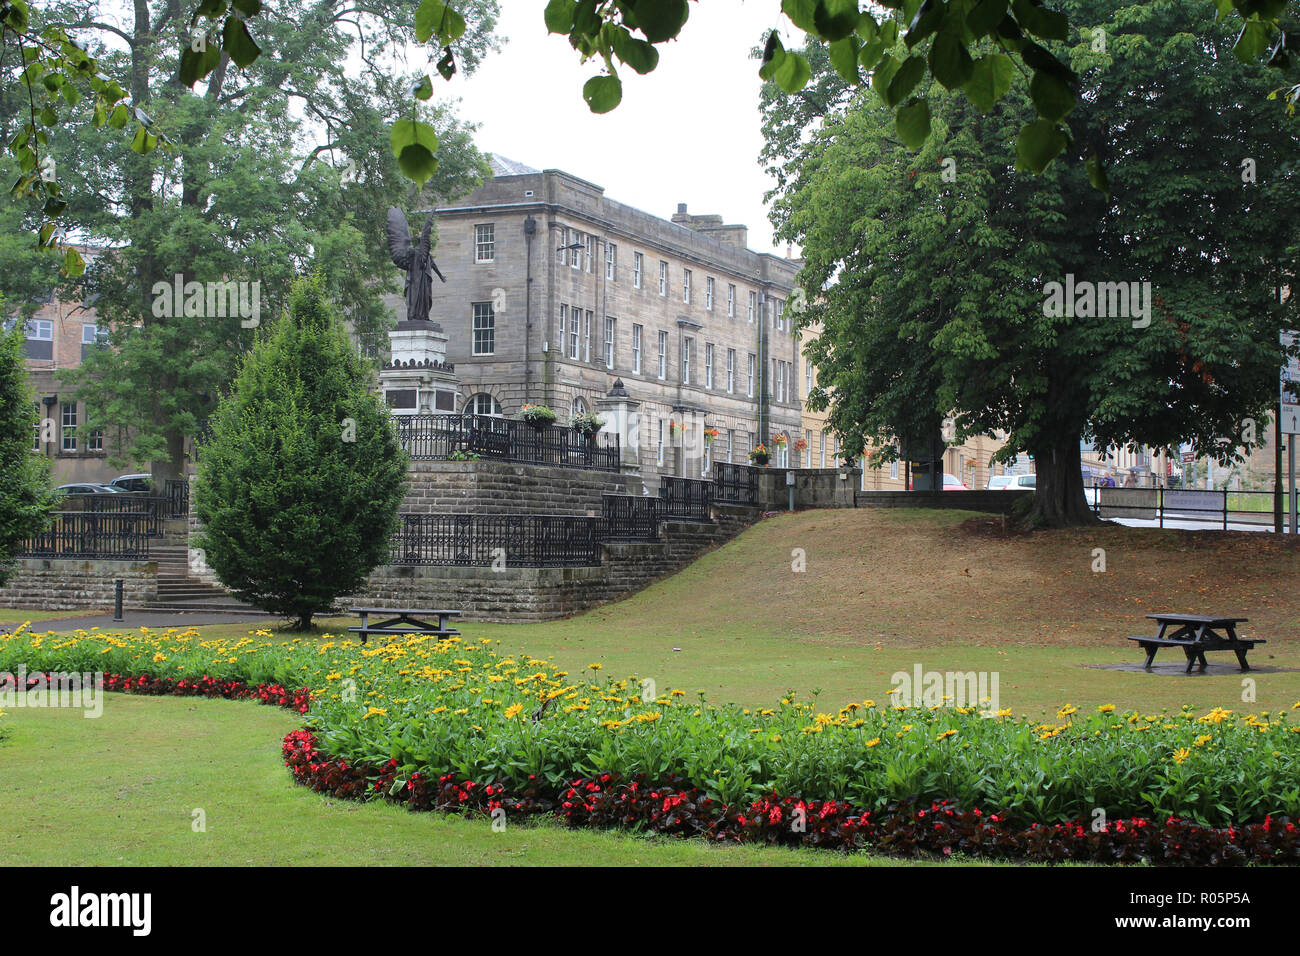 CUPAR, SCOTLAND, 20 JULY 2018: A view of Haugh Park and war memorial, looking towards St Catherine St in the town centre of Cupar in Fife, Scotland. Stock Photo